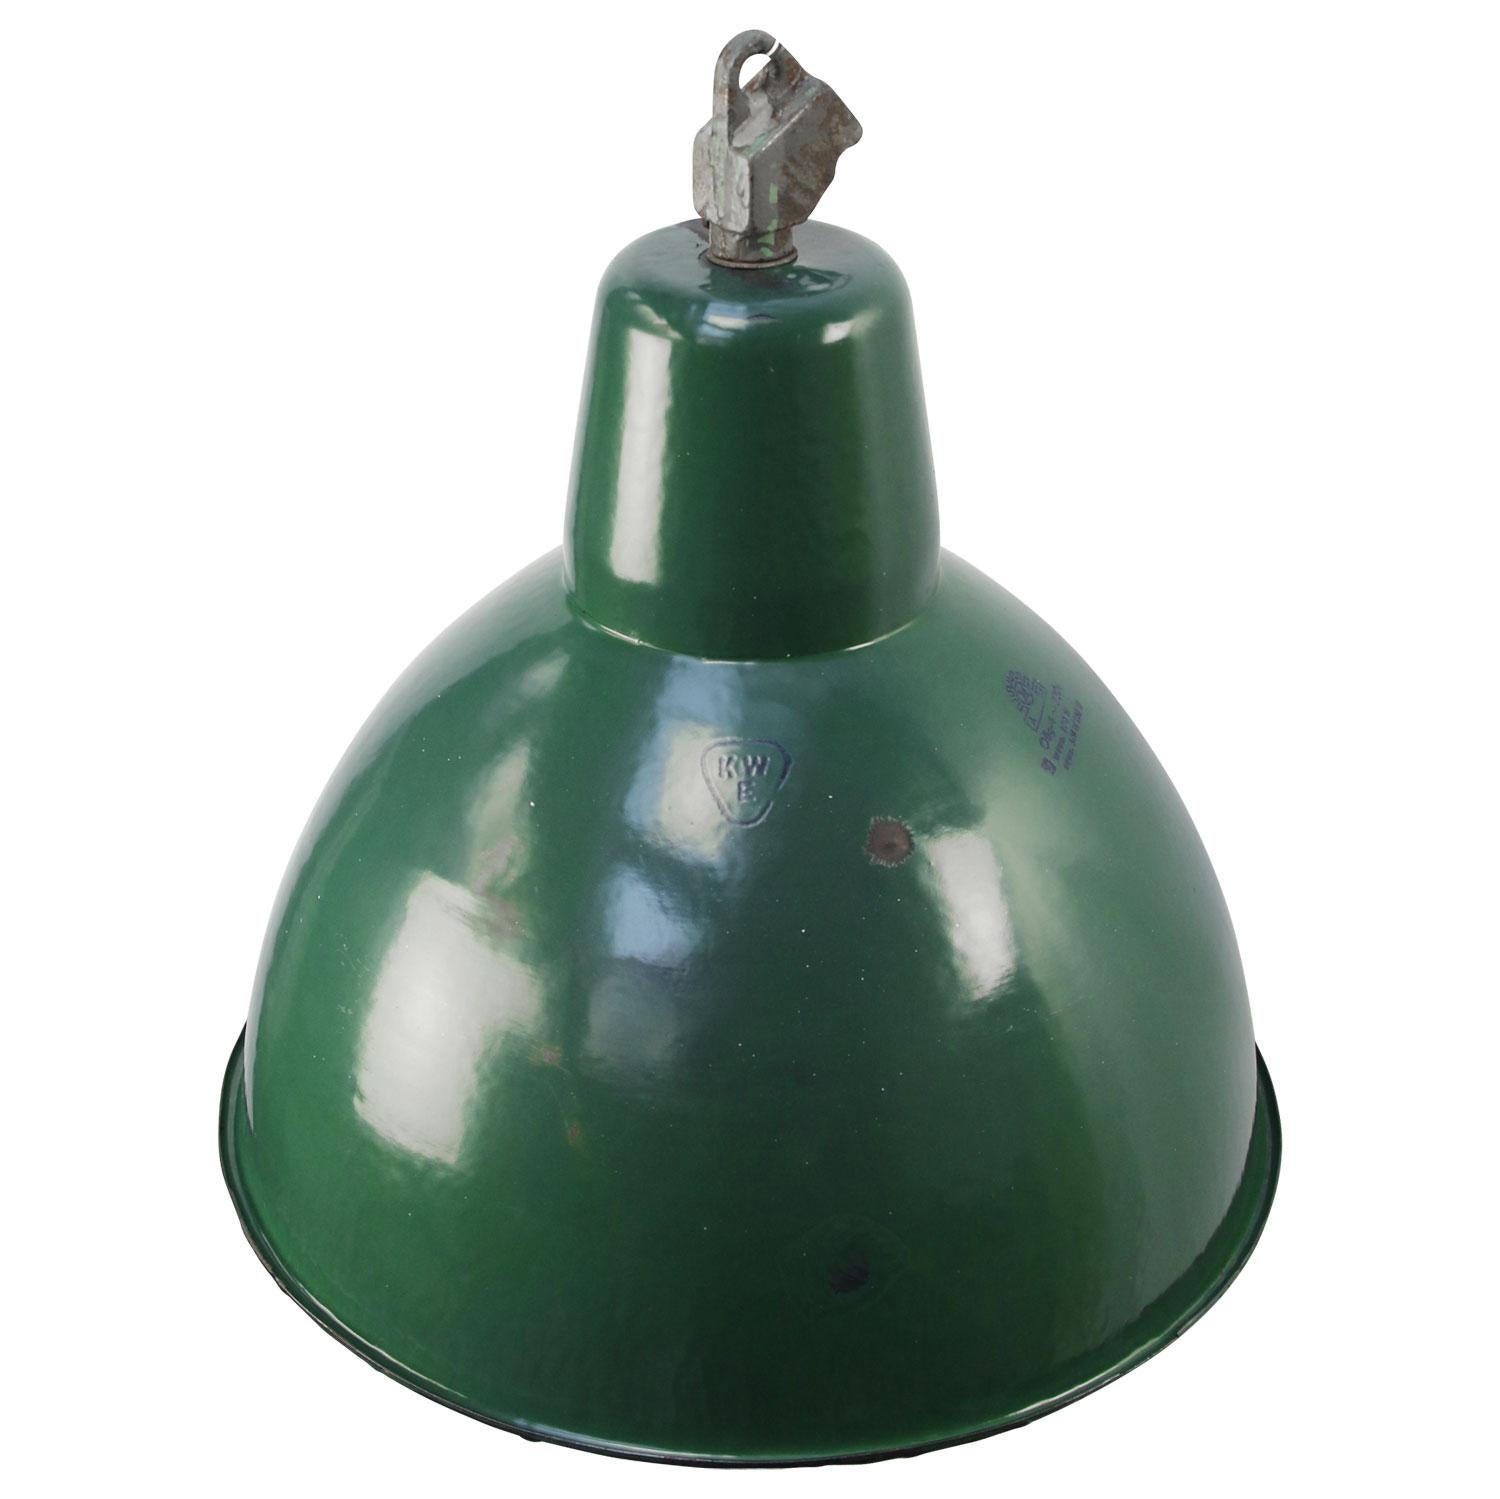 Industrial hanging light
green enamel white interior

Weight: 2.80 kg / 6.2 lb

Priced per individual item. All lamps have been made suitable by international standards for incandescent light bulbs, energy-efficient and LED bulbs. E26/E27 bulb